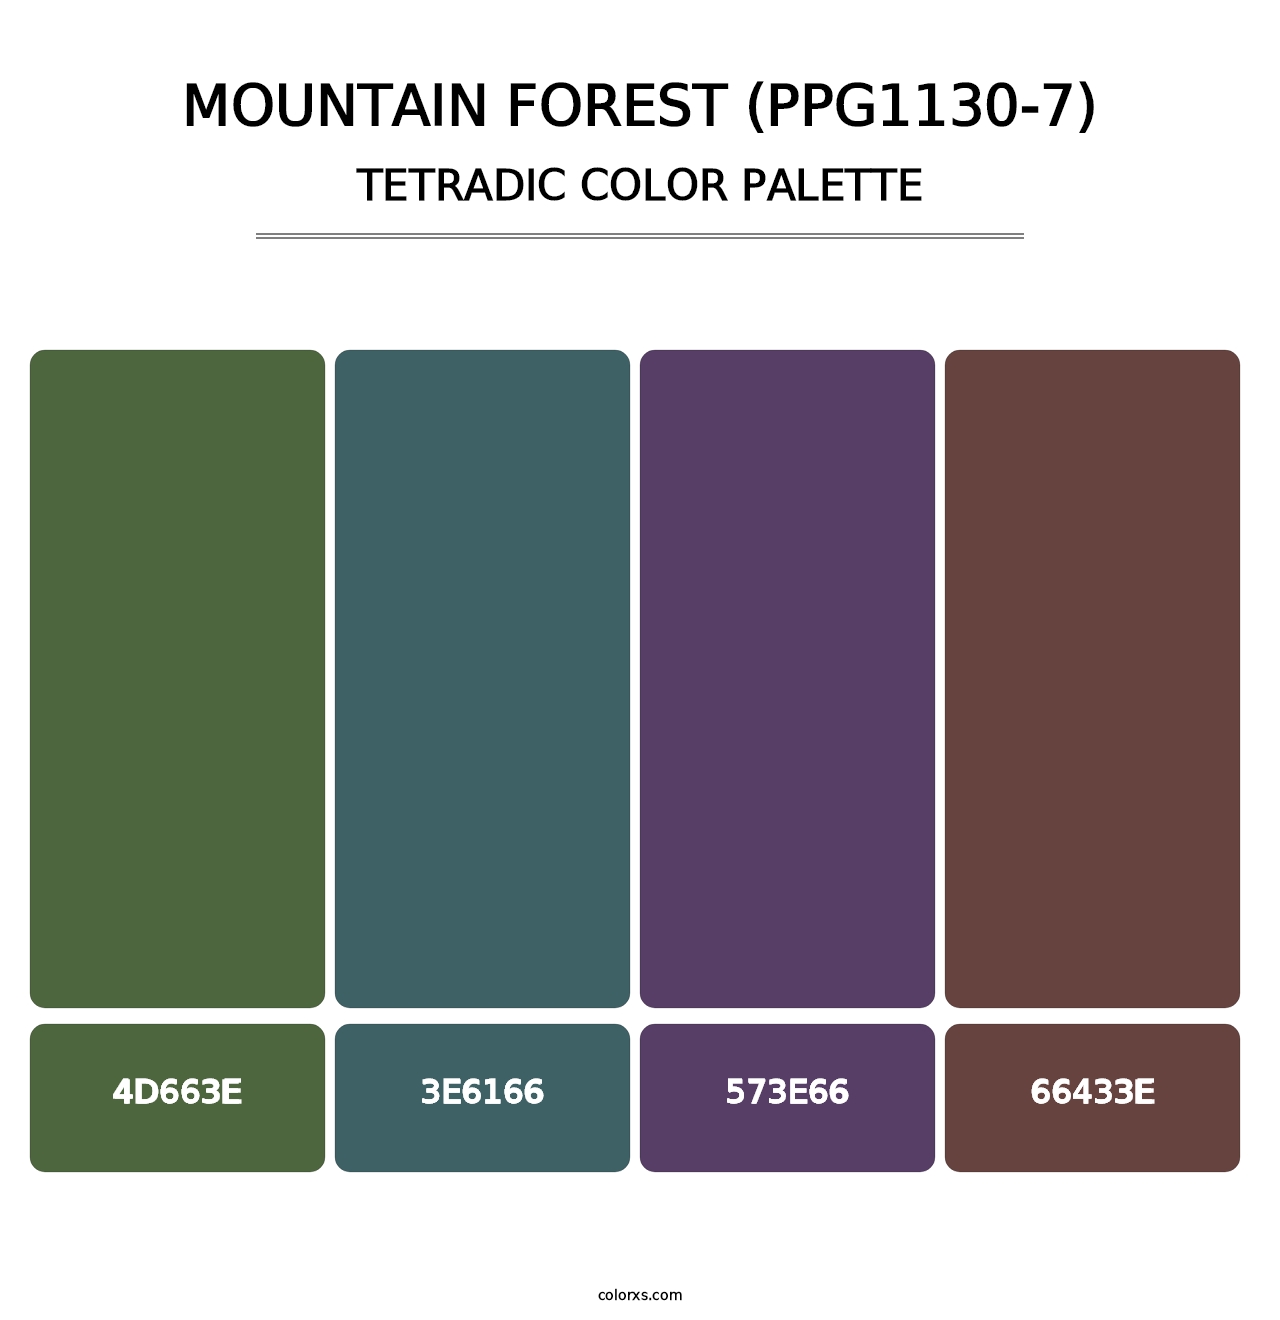 Mountain Forest (PPG1130-7) - Tetradic Color Palette